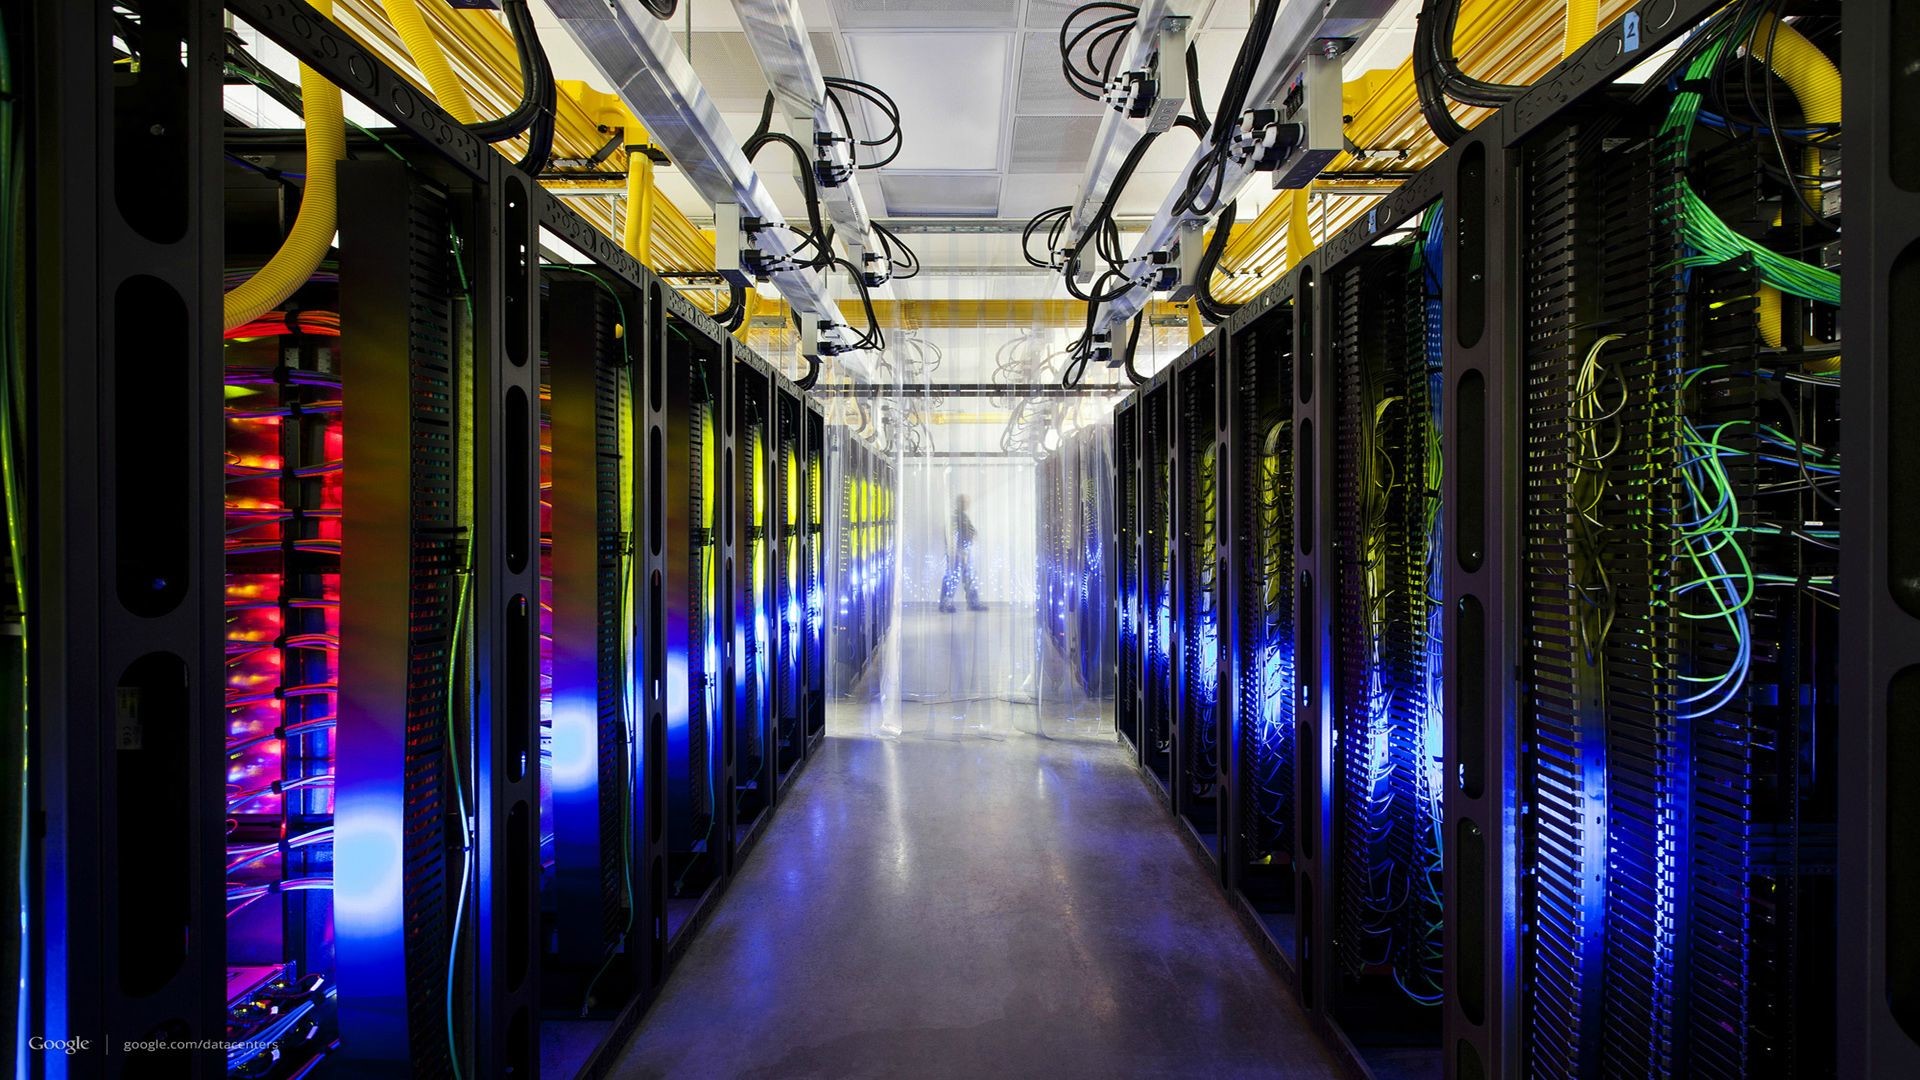 1920x1080 Google's Datacenter. Source post in comments.